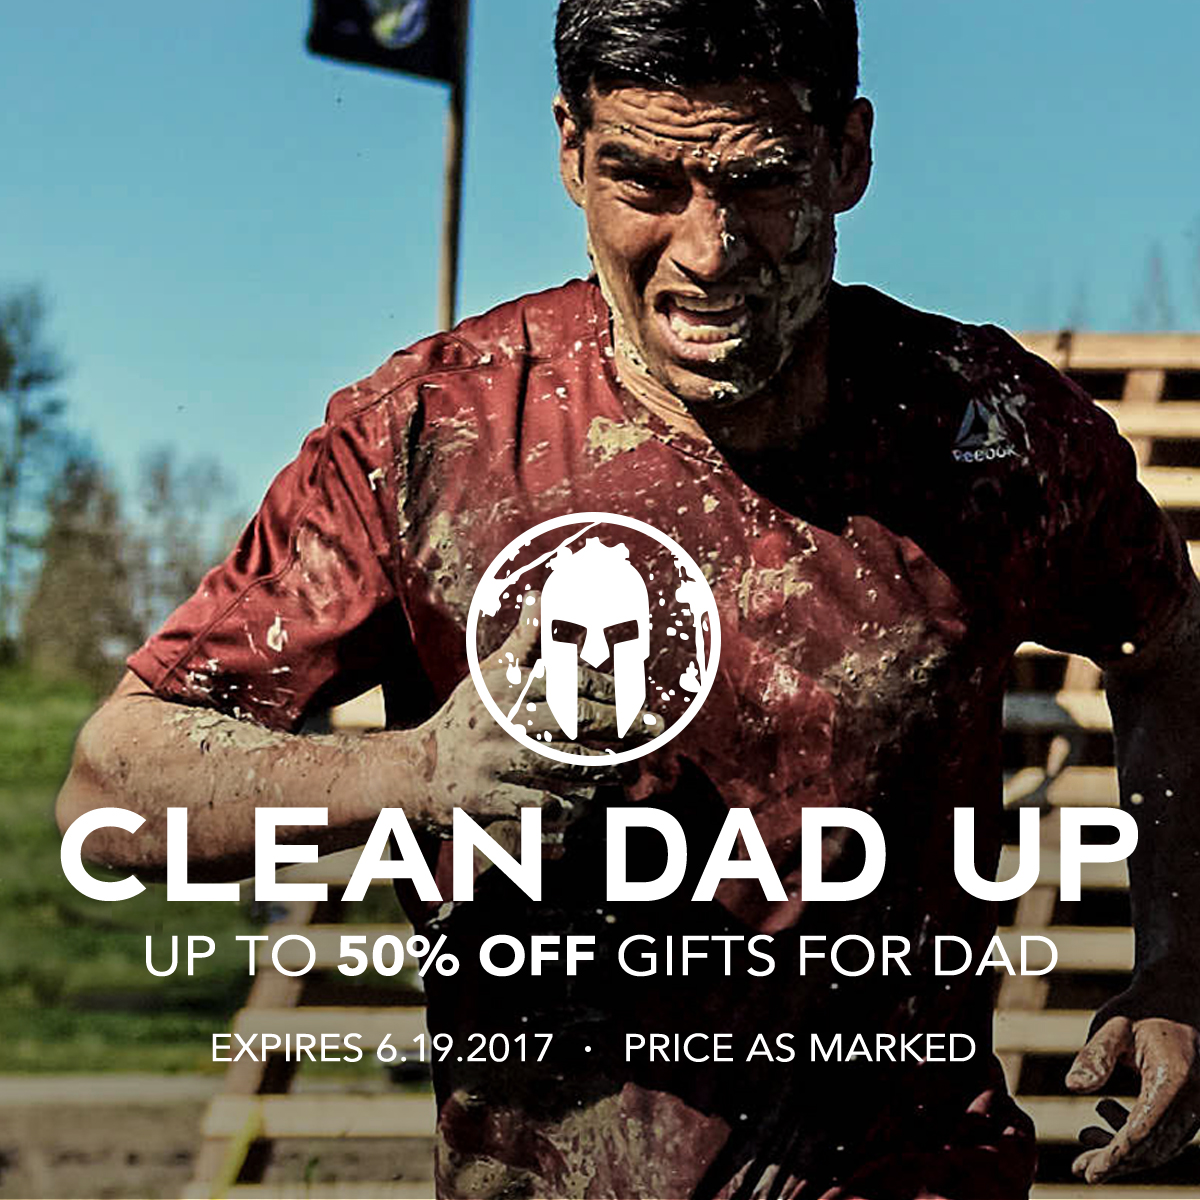 Spartan Race Father’s Day Promotion